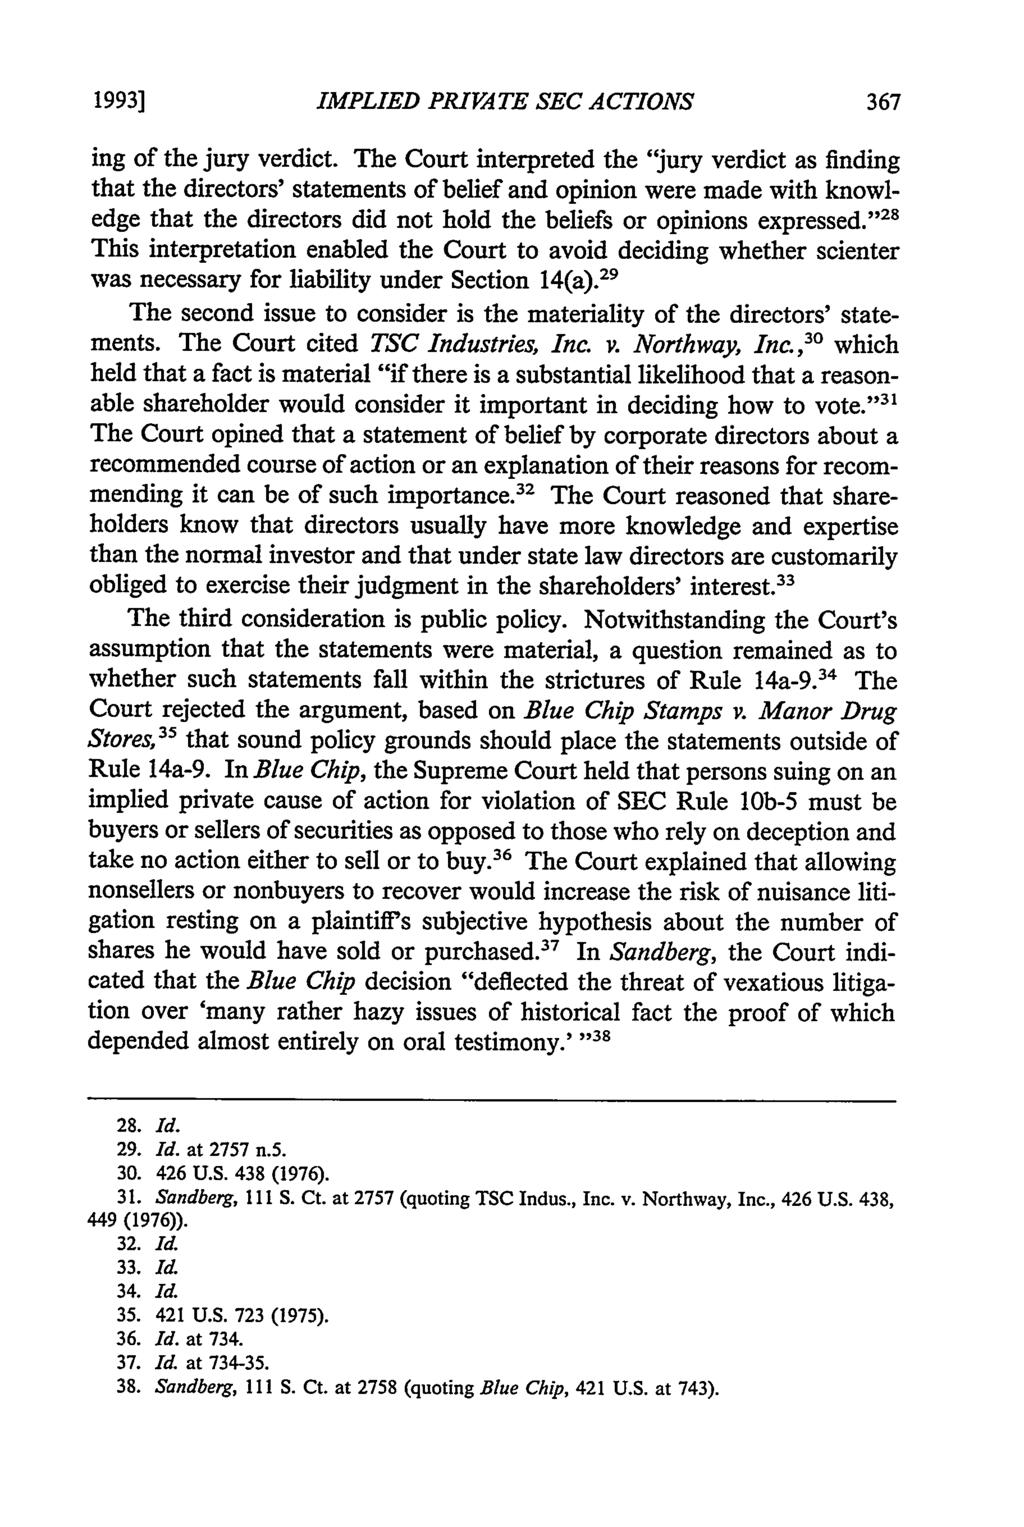 19931 IMPLIED PRIVATE SEC ACTIONS ing of the jury verdict.